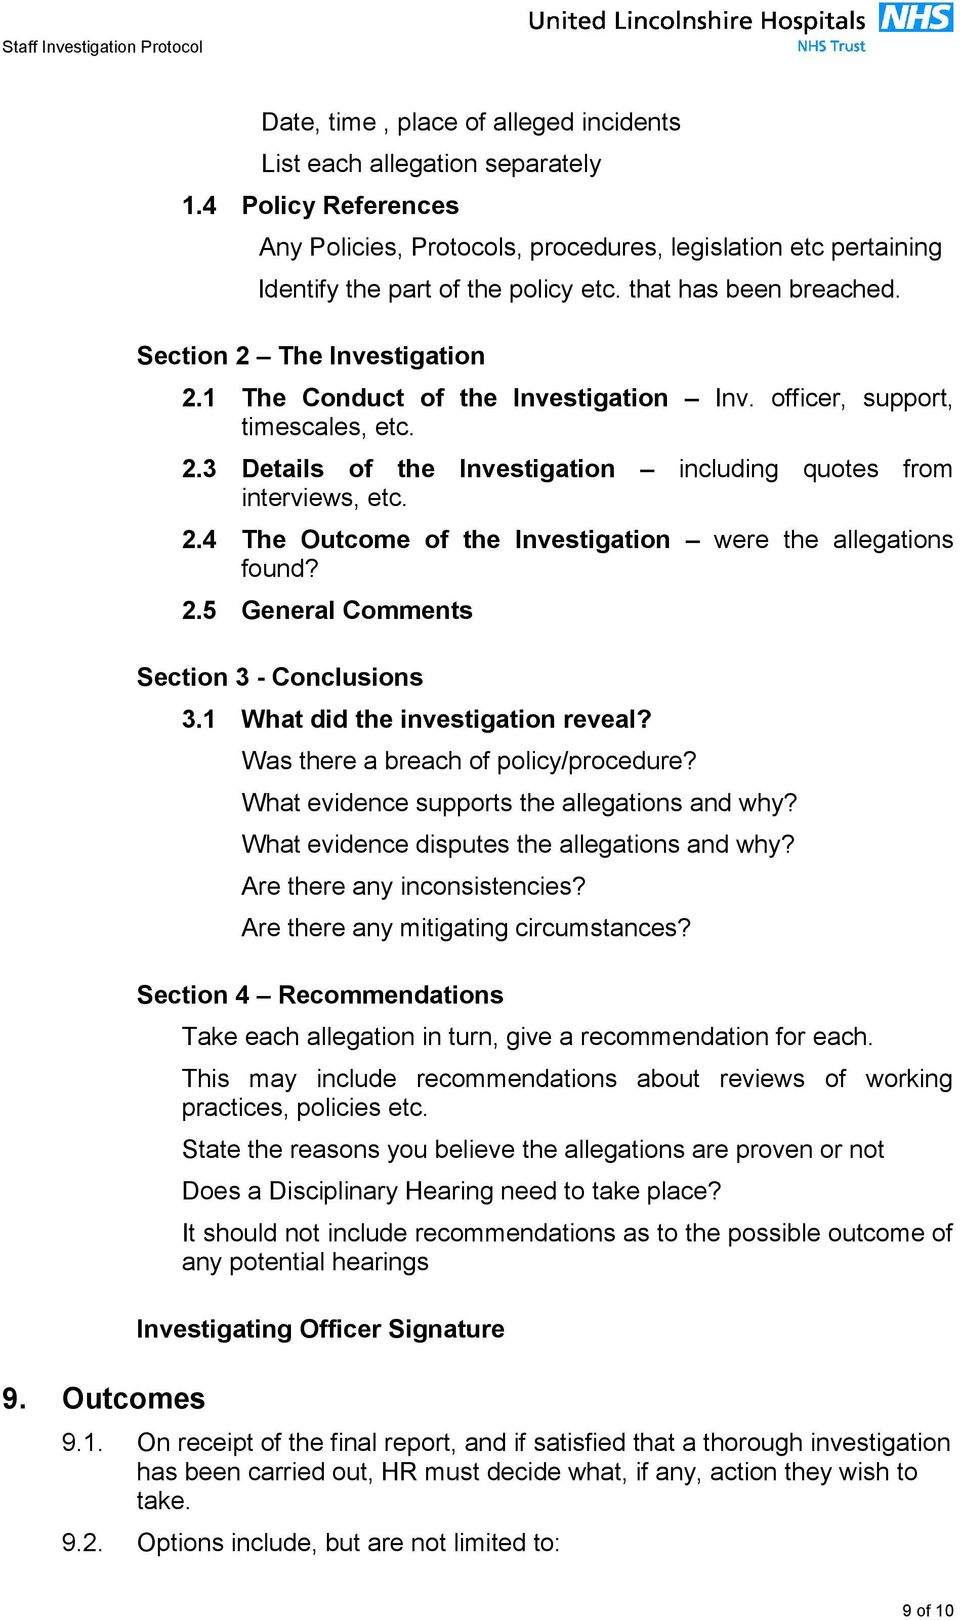 1 The Conduct of the Investigation Inv. officer, support, timescales, etc. 2.3 Details of the Investigation including quotes from interviews, etc. 2.4 The Outcome of the Investigation were the allegations found?